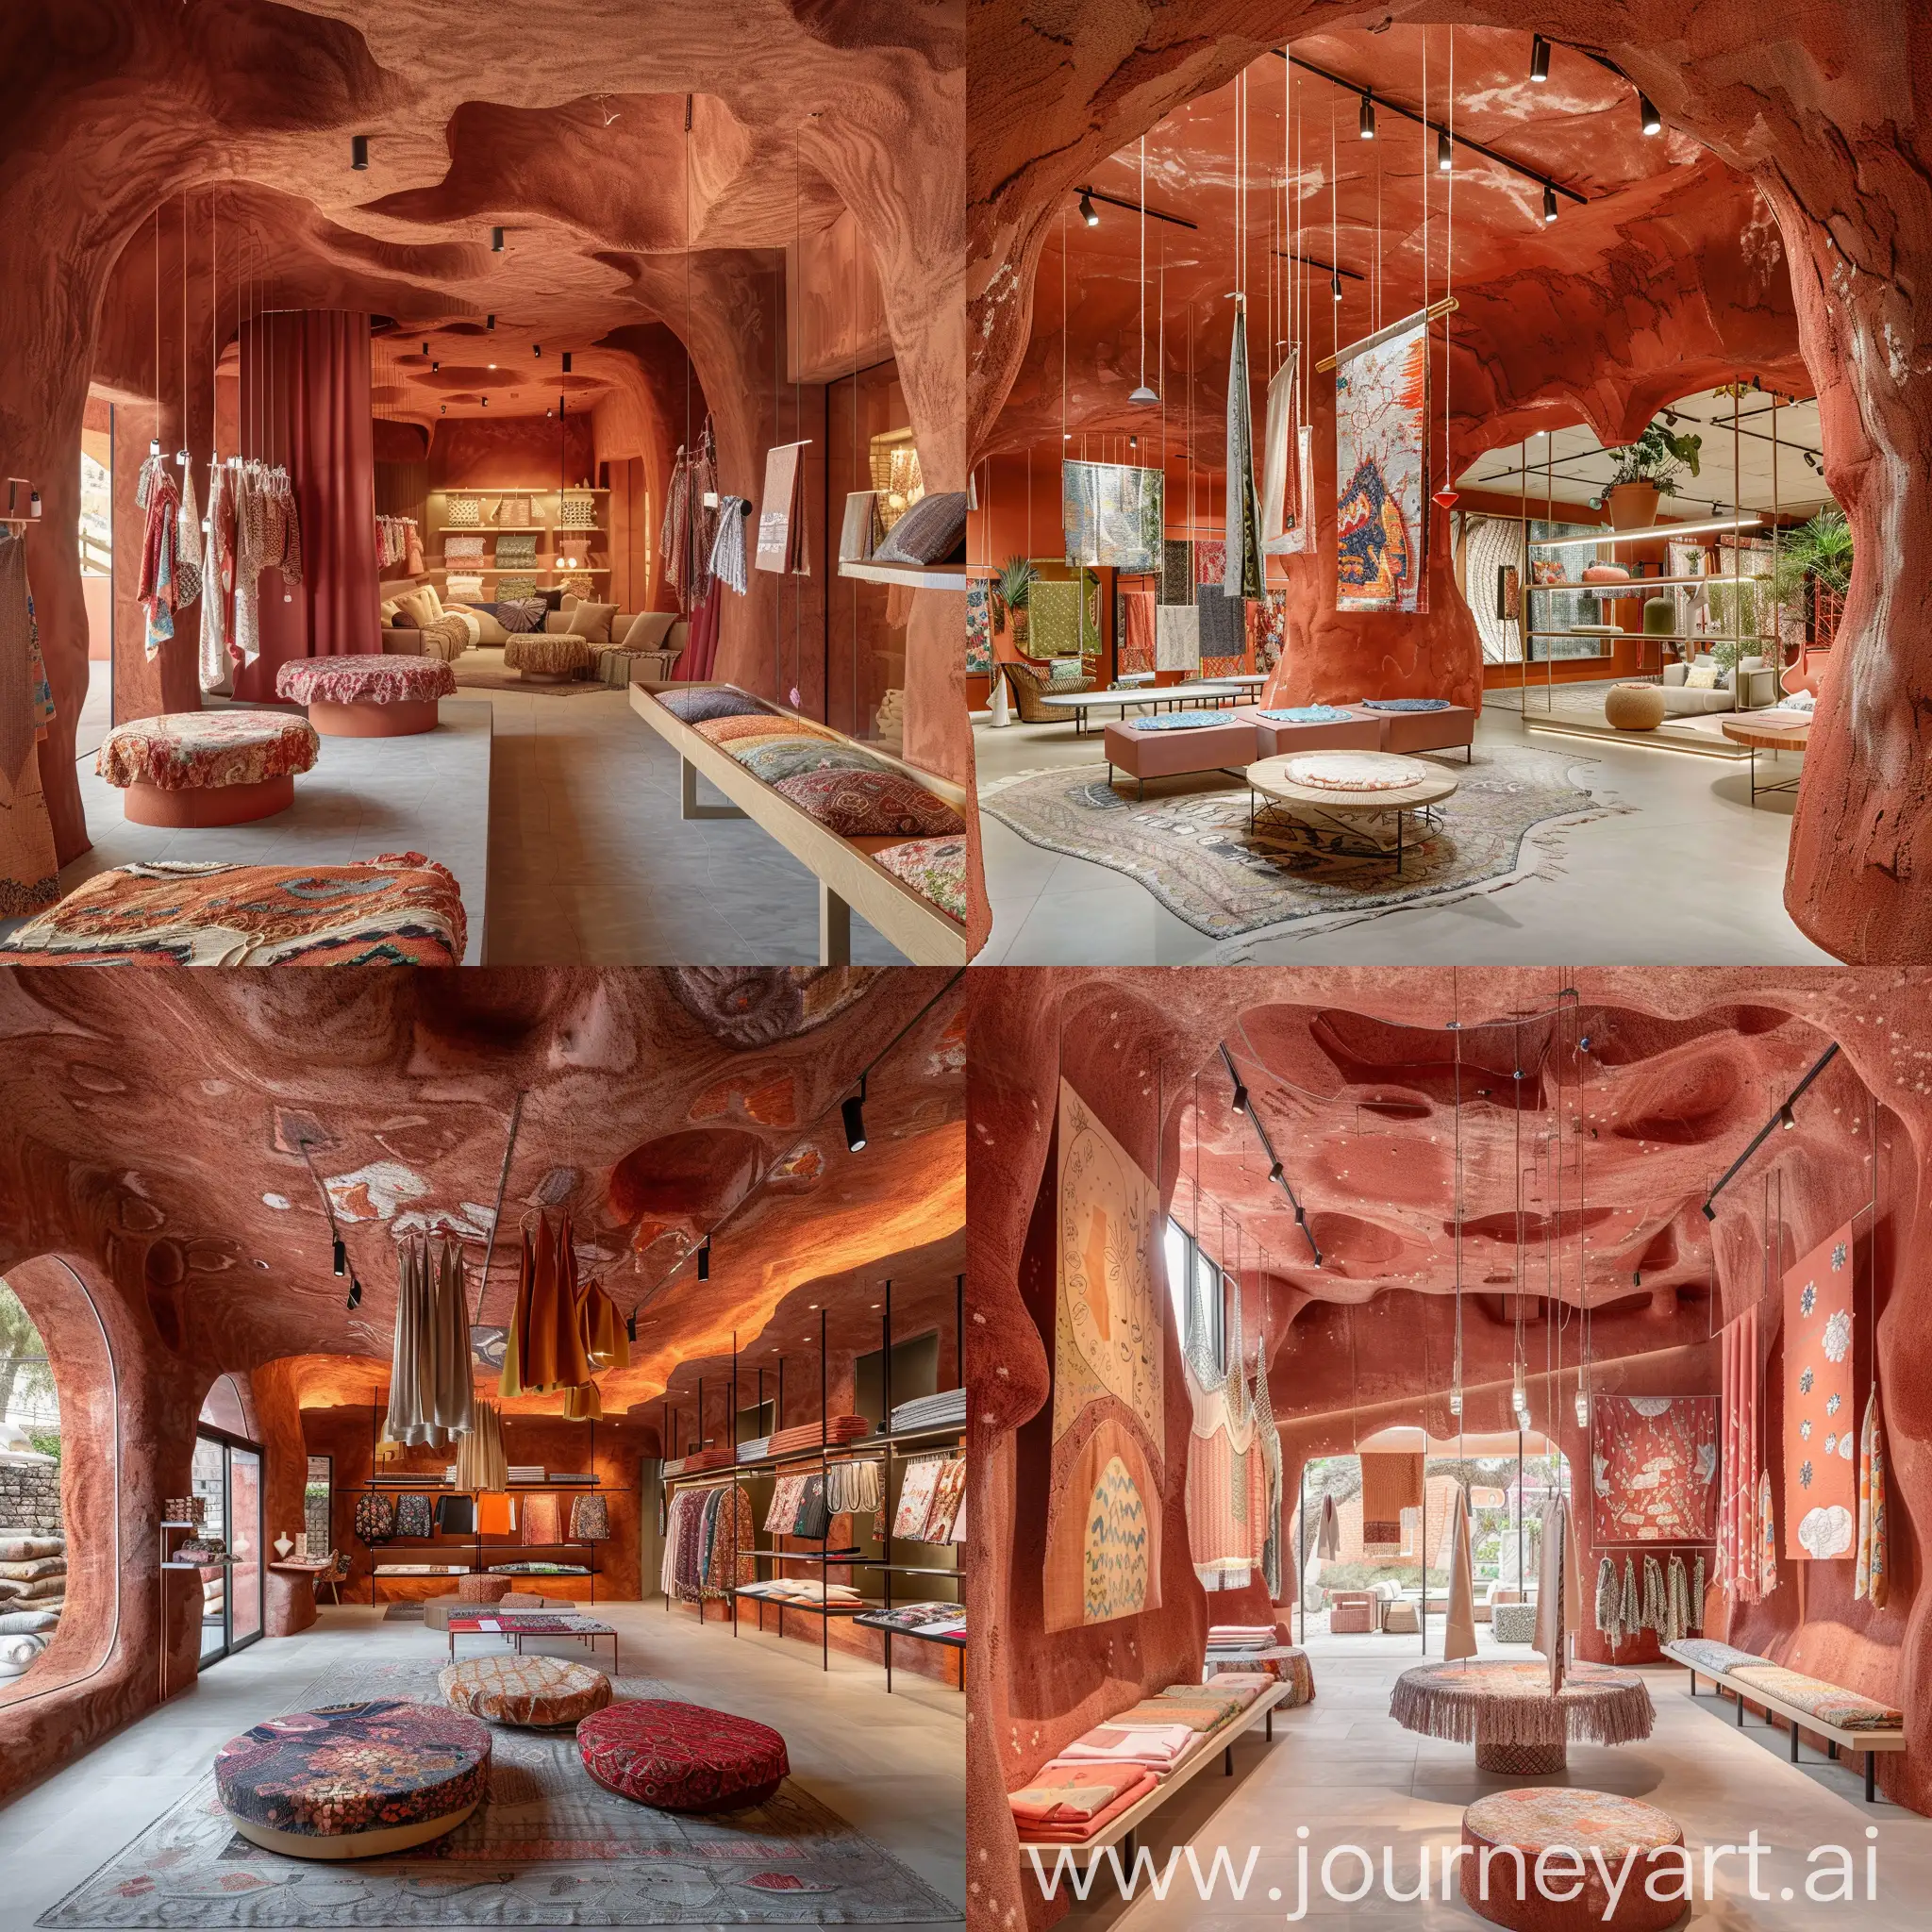 Modern-Cave-Fabric-Showroom-Red-Terracotta-Color-Scheme-and-Hanging-Fabric-Displays